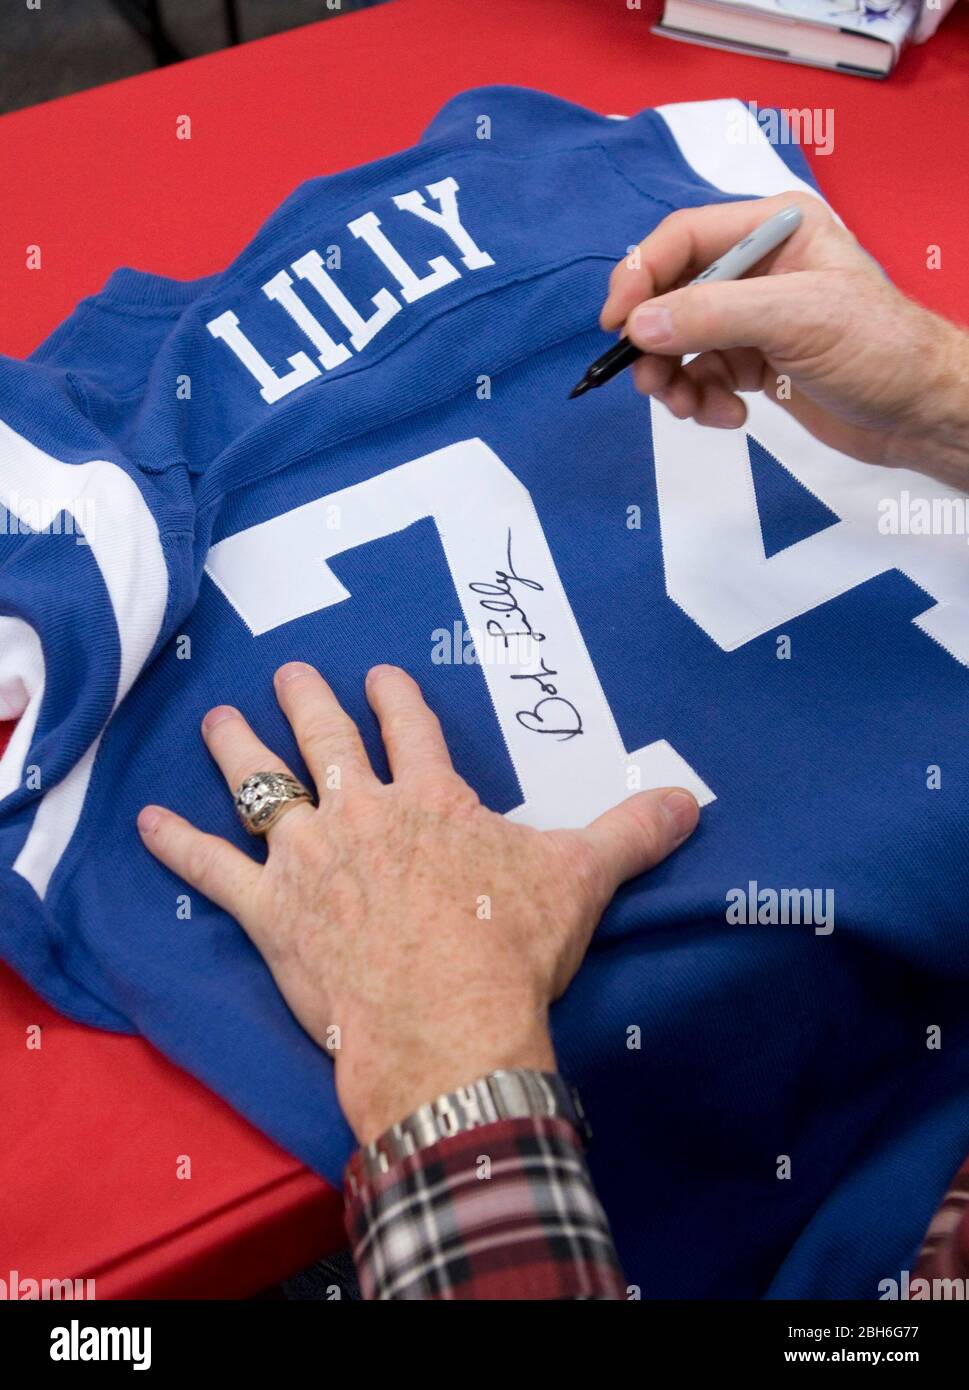 Austin, Texas USA, November 21, 2008: Legendary Dallas Cowboy defensive tackle Bob Lilly uses a Sharpie pen to autograph a replica of his jersey at a book signing for his new book, 'A Cowboy's Life.' Lilly's 14-year NFL career from 1961 to 1974 was highlighted by seven All-Pro selections and one Super Bowl victory in 1972.  ©Bob Daemmrich Stock Photo